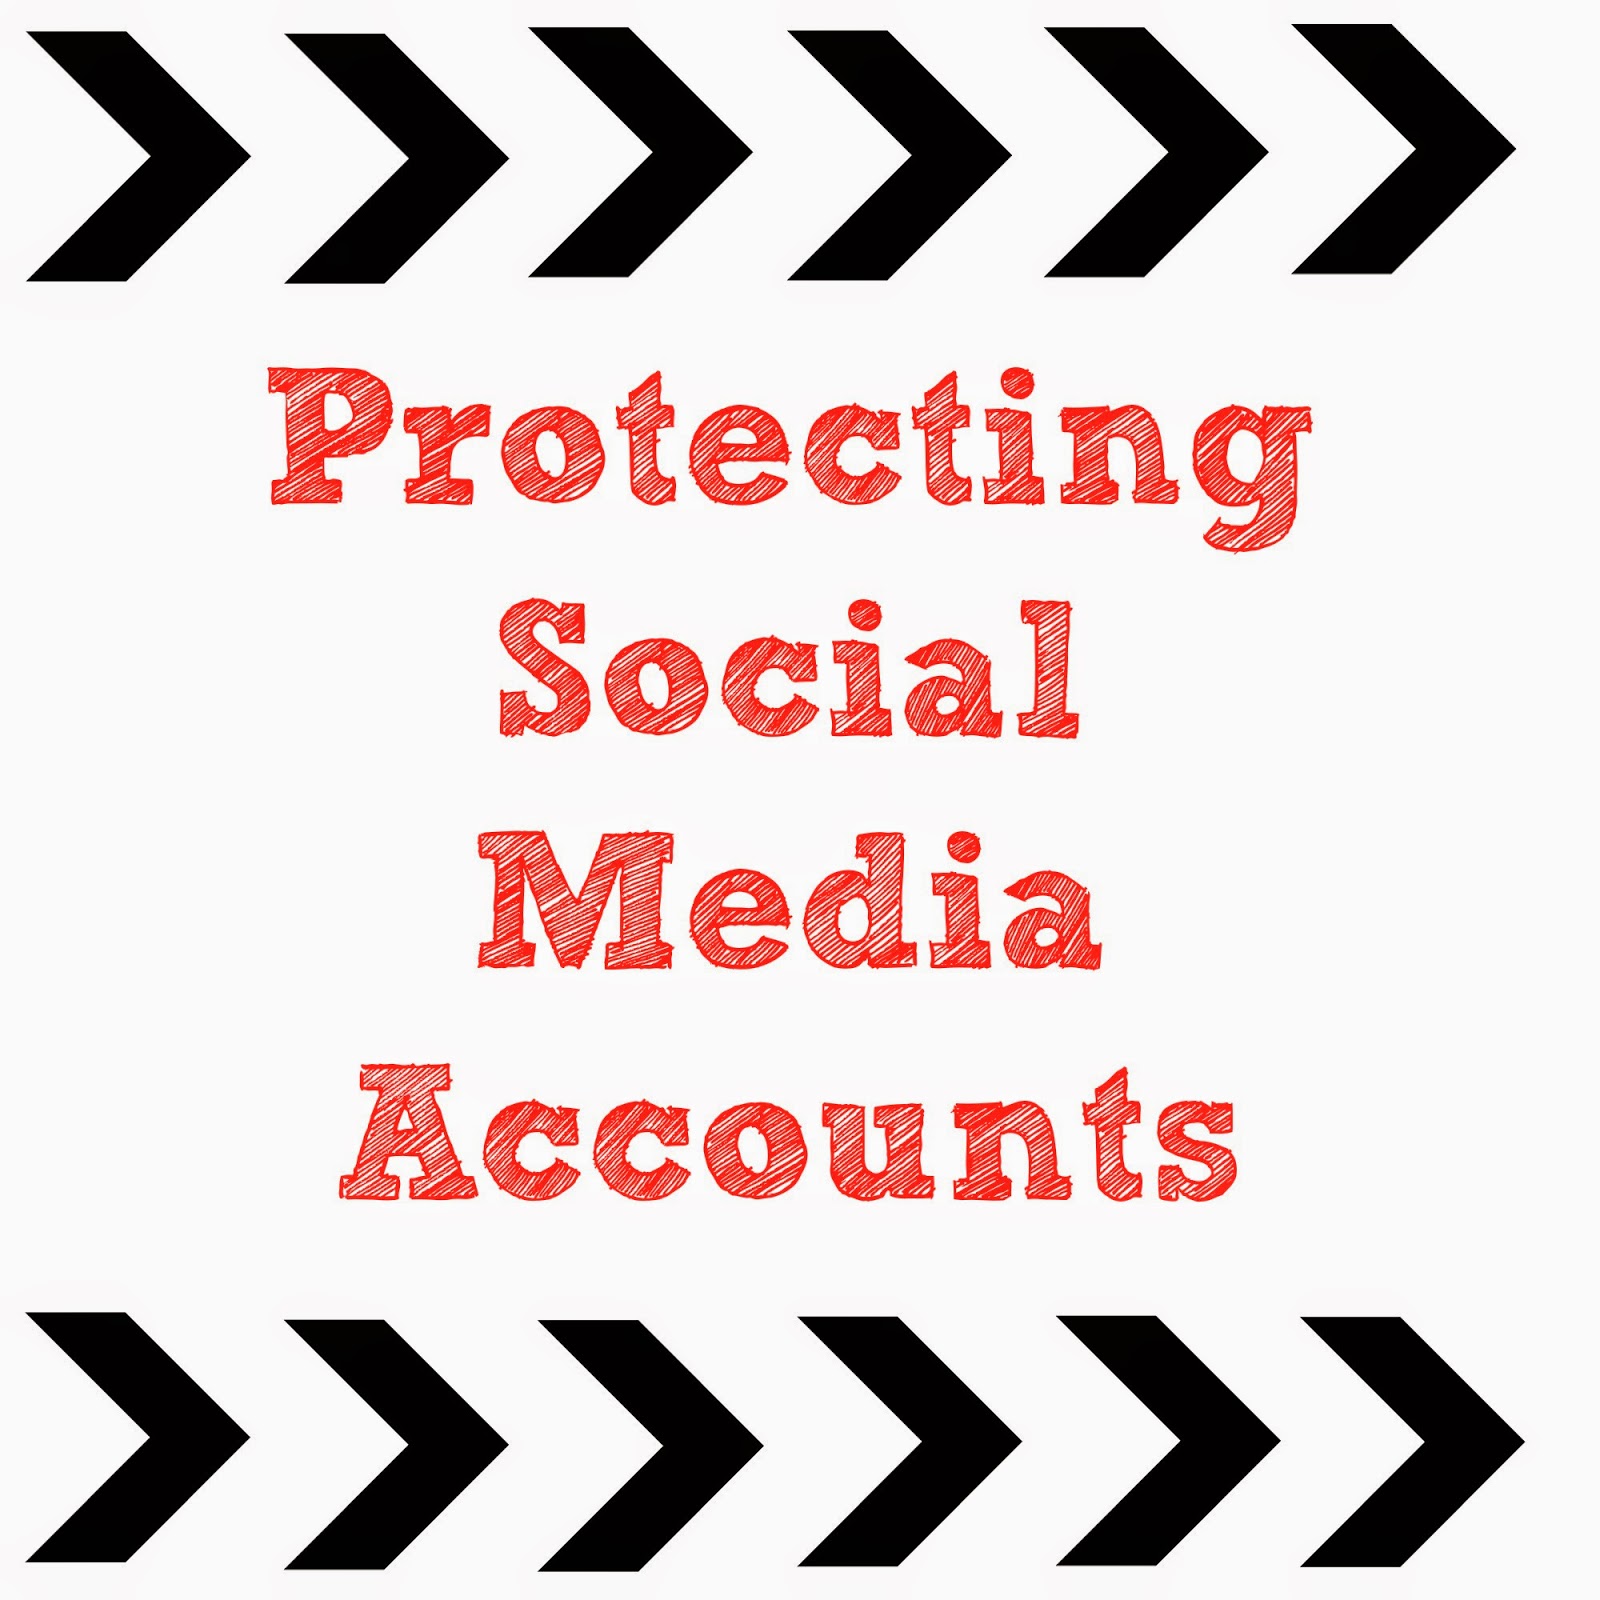 Further Safety Measures on Social Media